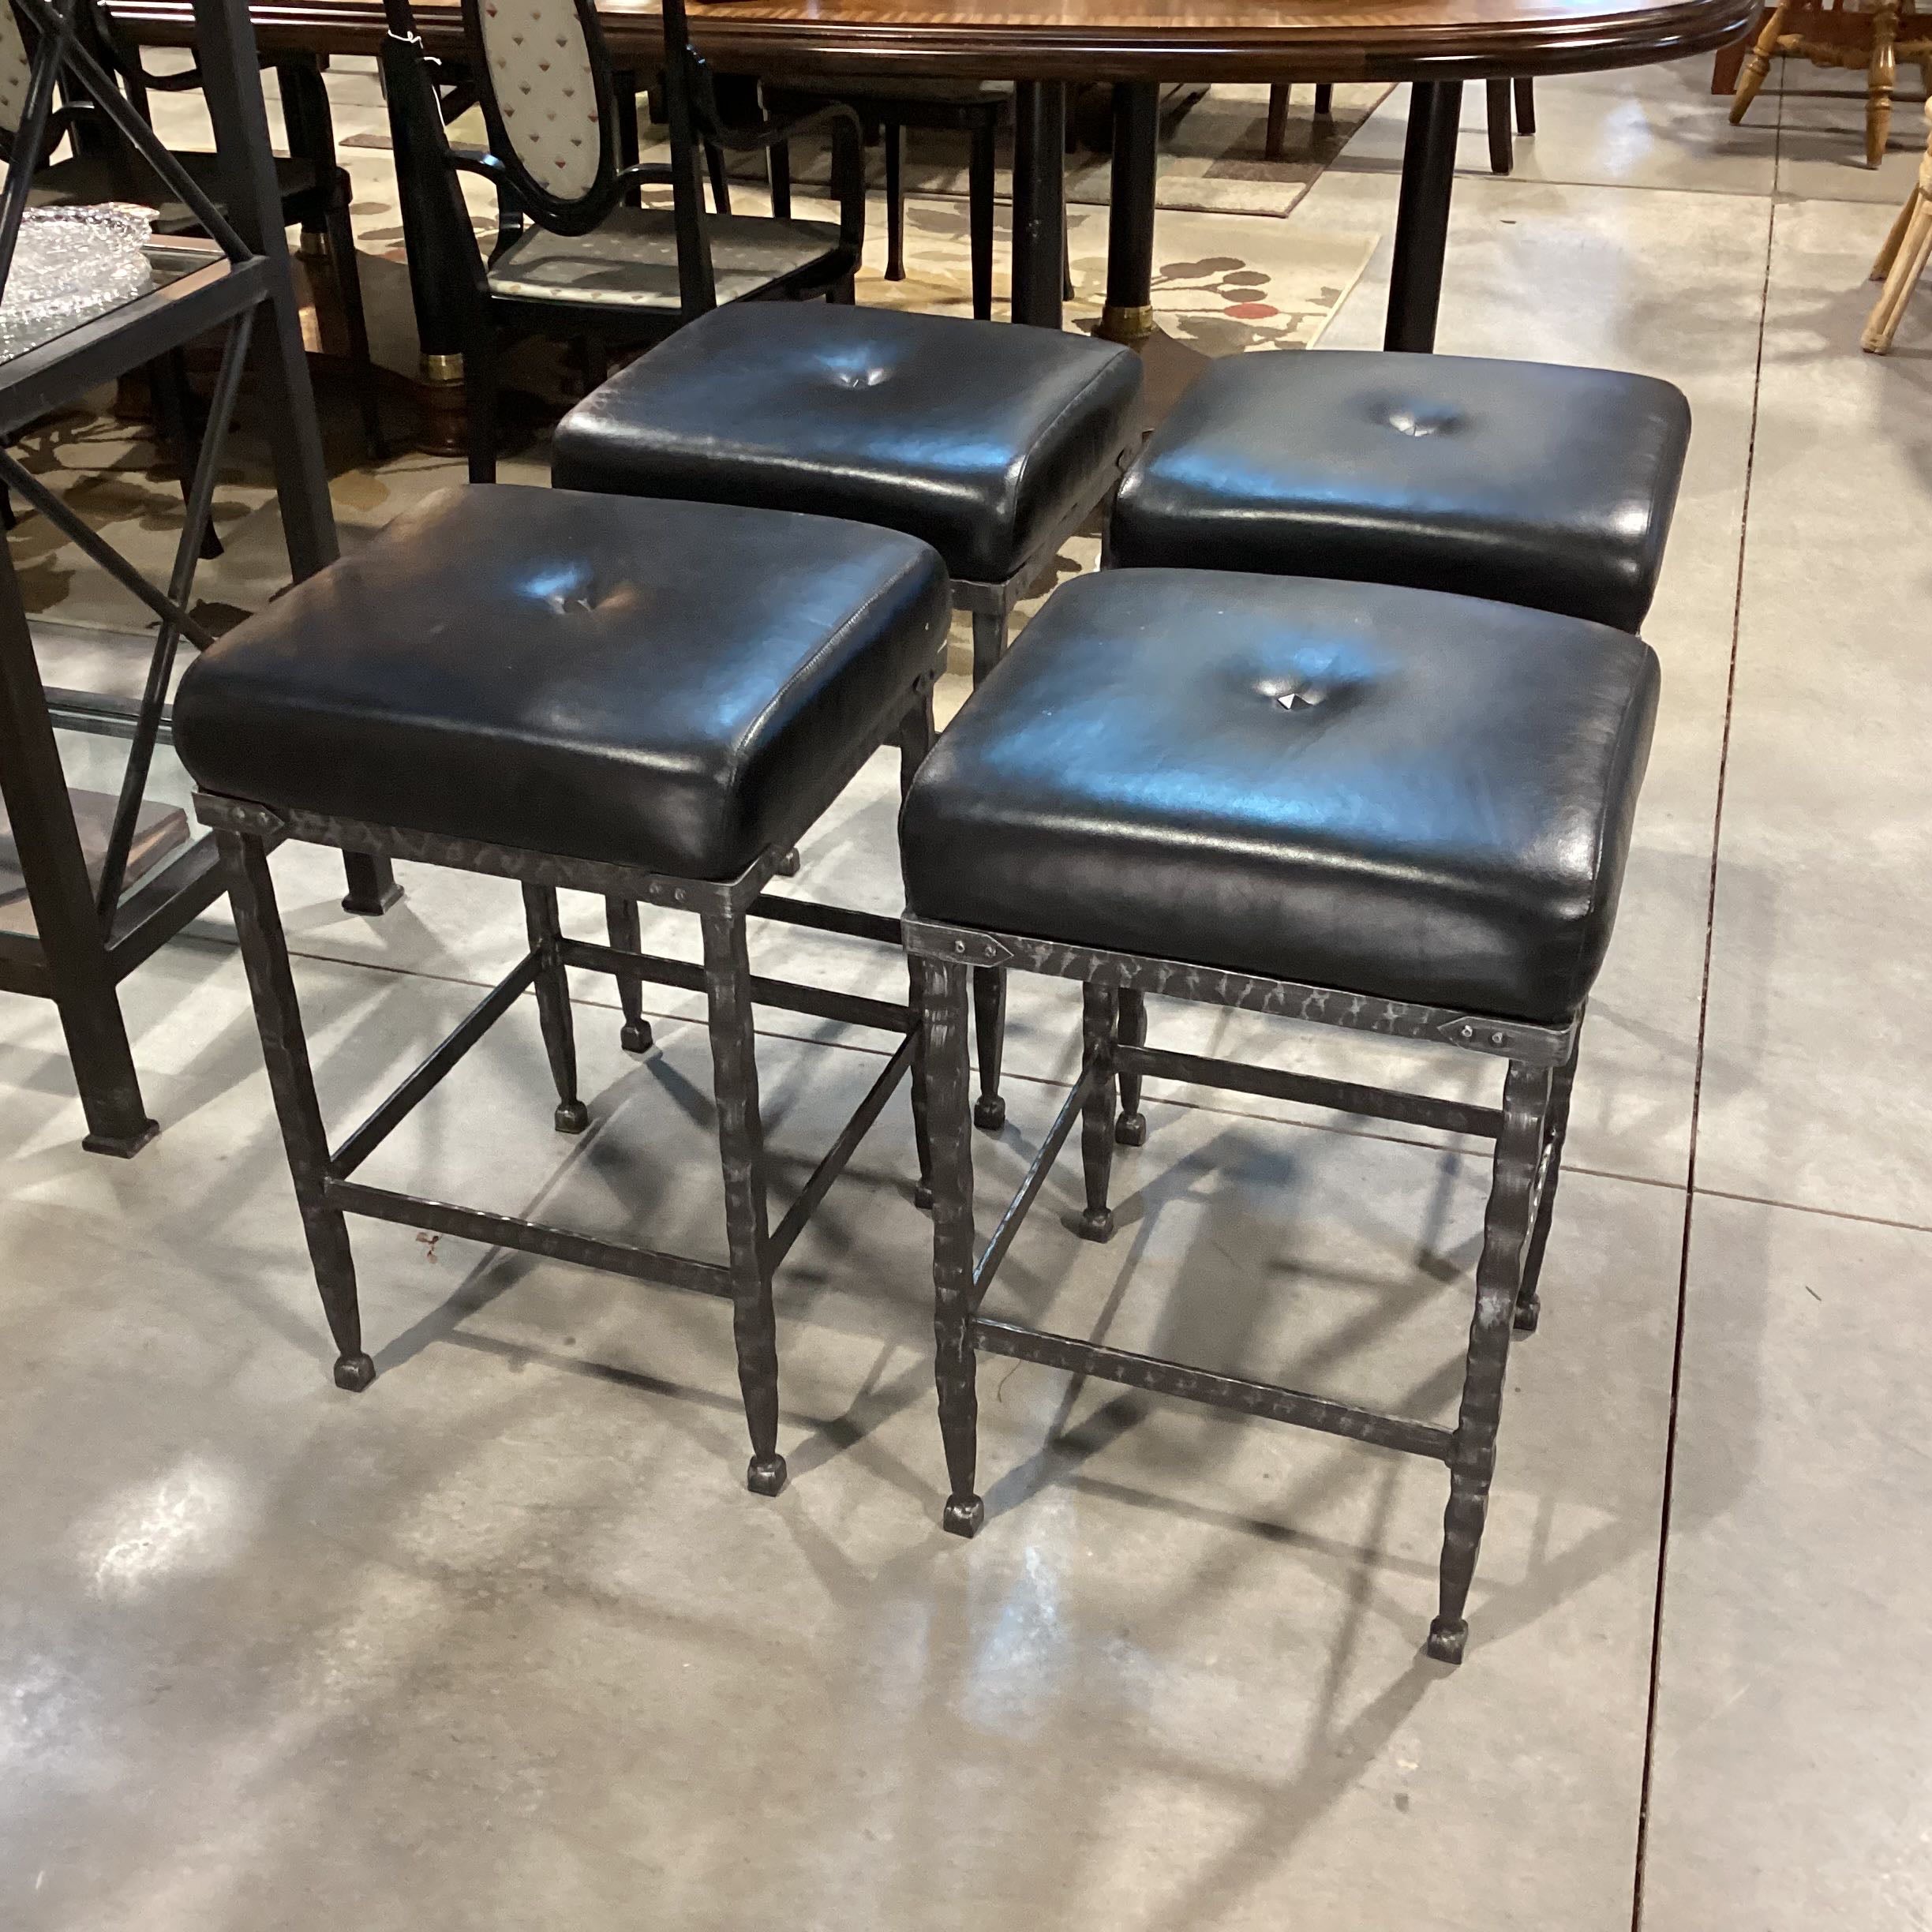 SET of 4 Stone Country Ironworks Texture Iron & Leather Bar Stools